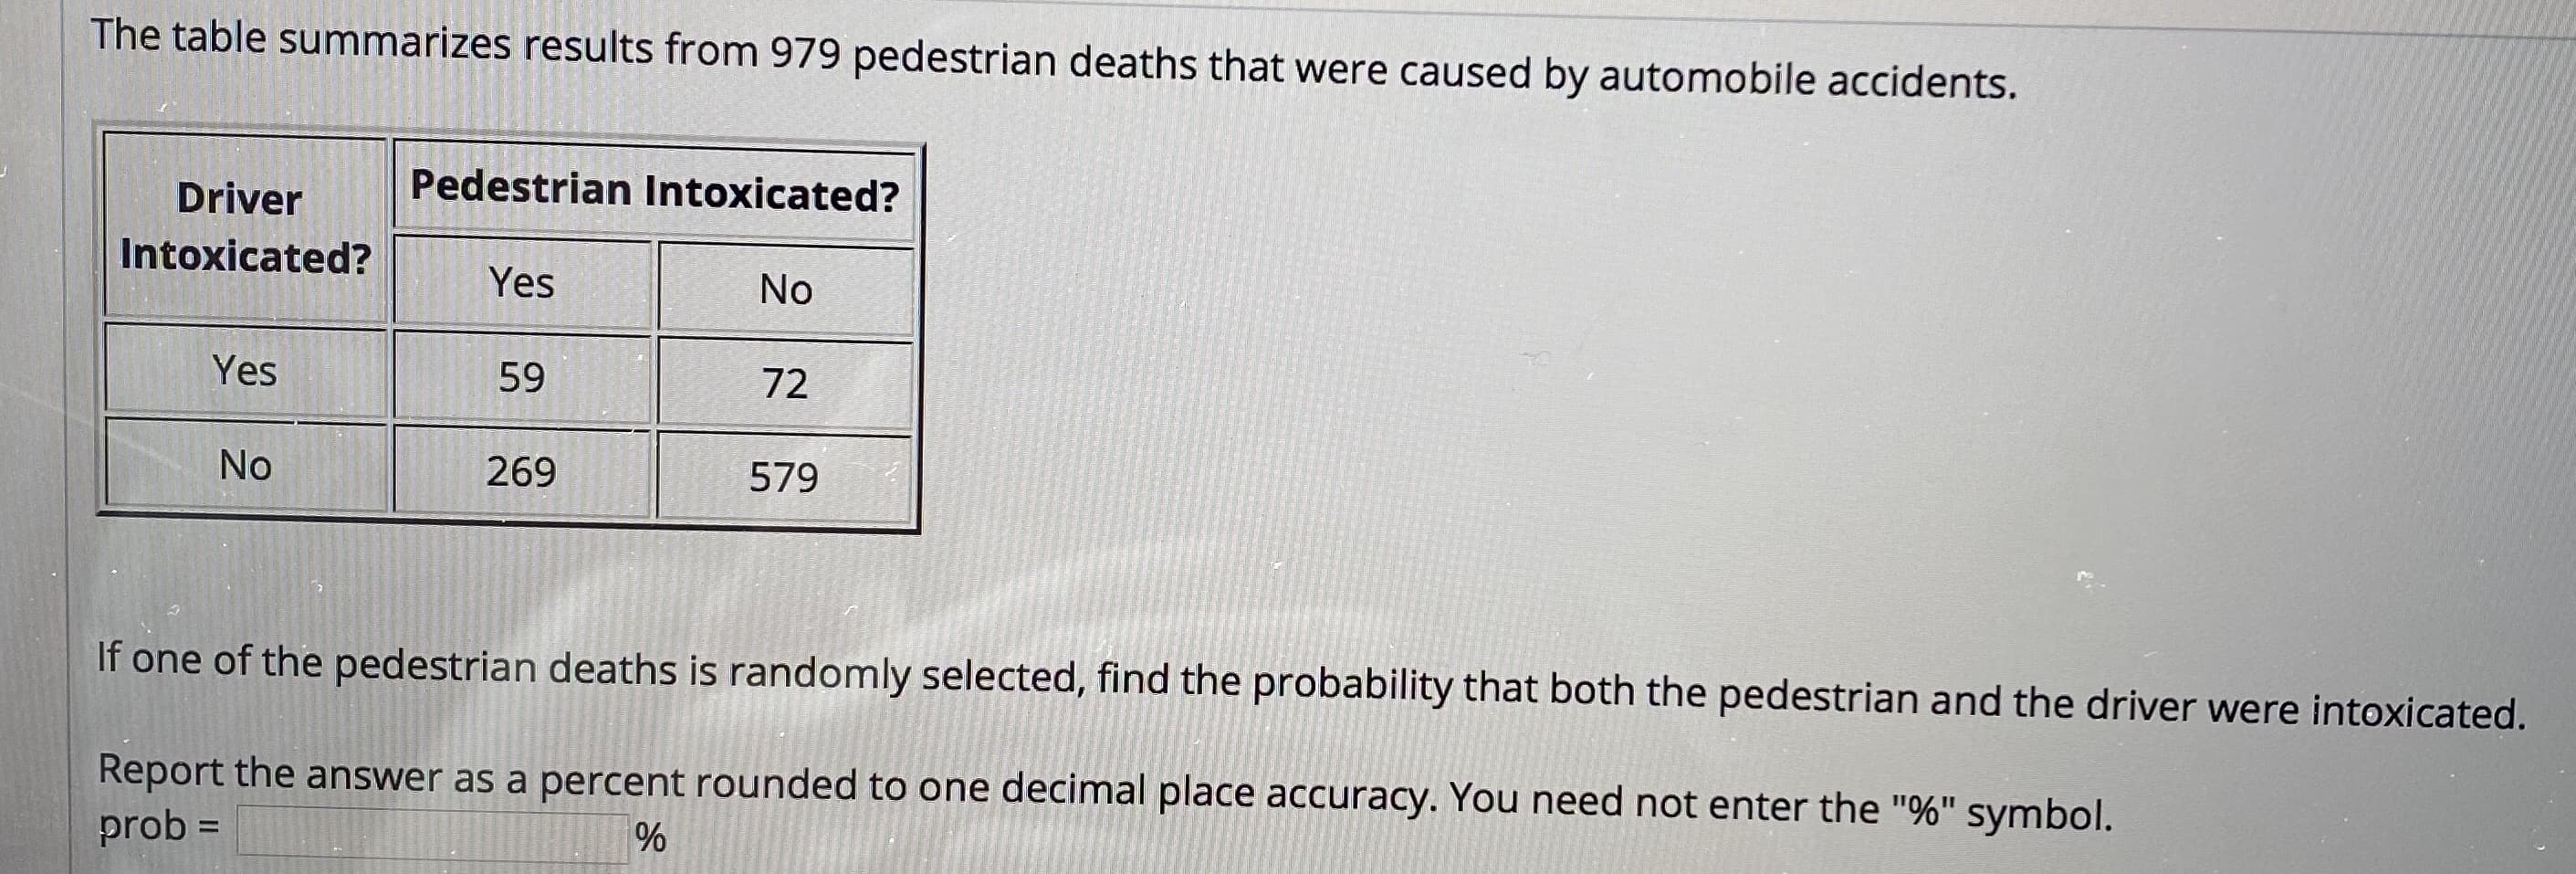 The table summarizes results from 979 pedestrian deaths that were caused by automobile accidents.
Driver
Pedestrian Intoxicated?
Intoxicated?
Yes
No
Yes
59
72
No
269
579
If one of the pedestrian deaths is randomly selected, find the probability that both the pedestrian and the driver were intoxicated.
Report the answer as a percent rounded to one decimal place accuracy. You need not enter the "%" symbol.
prob =
%3D
